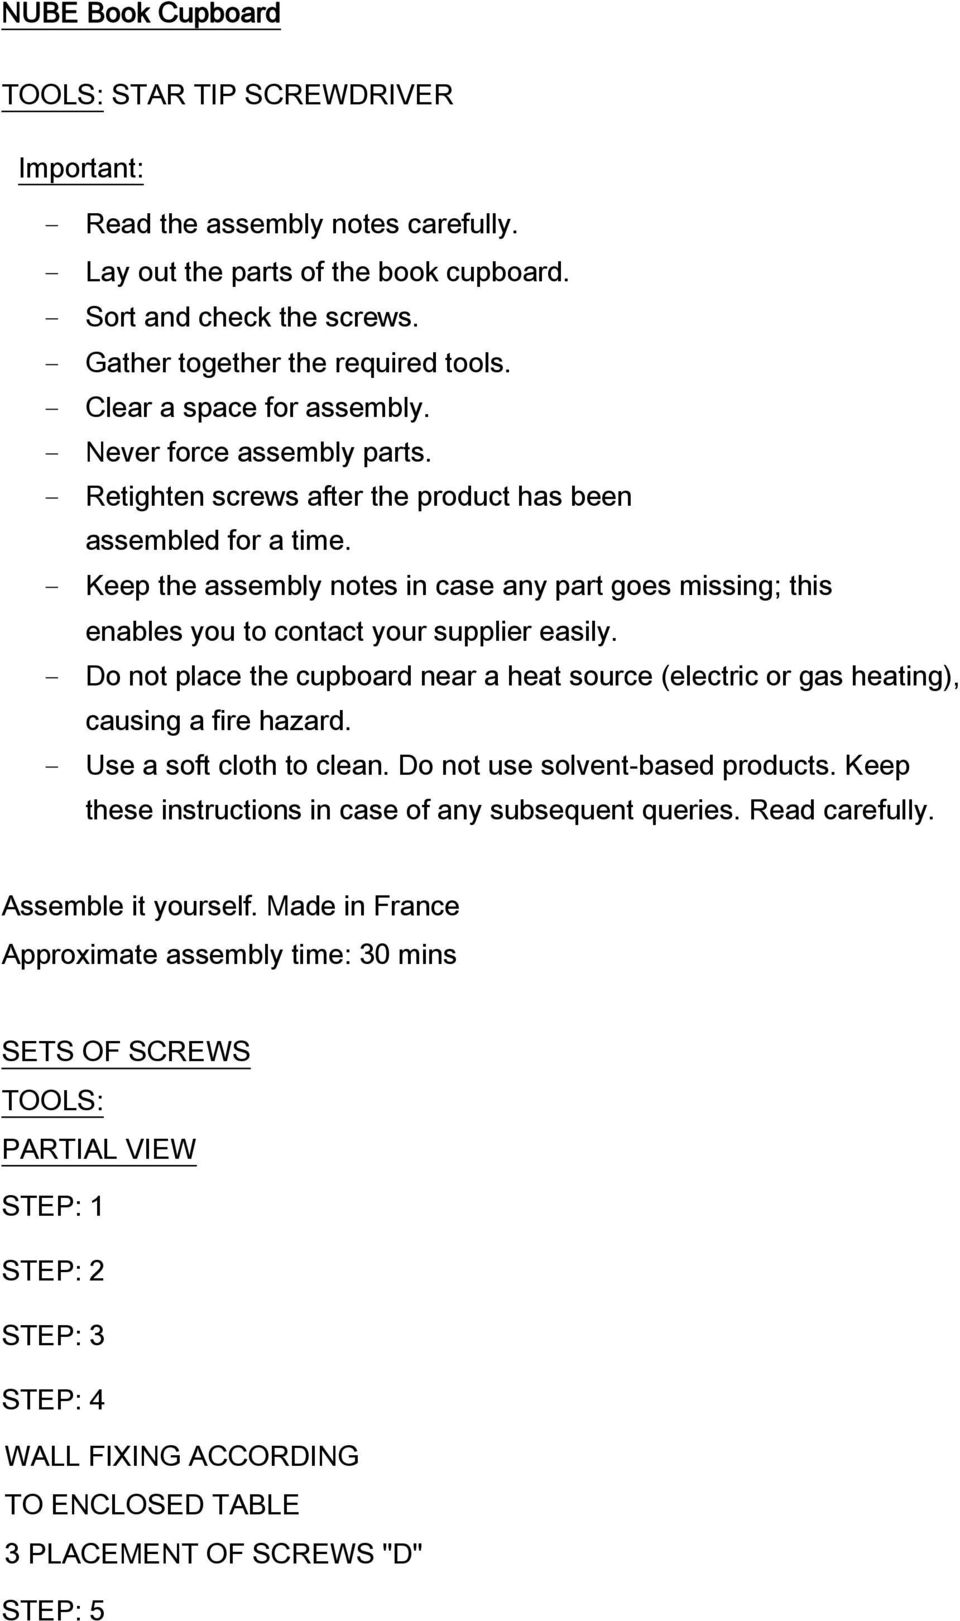 - Keep the assembly notes in case any part goes missing; this enables you to contact your supplier easily.